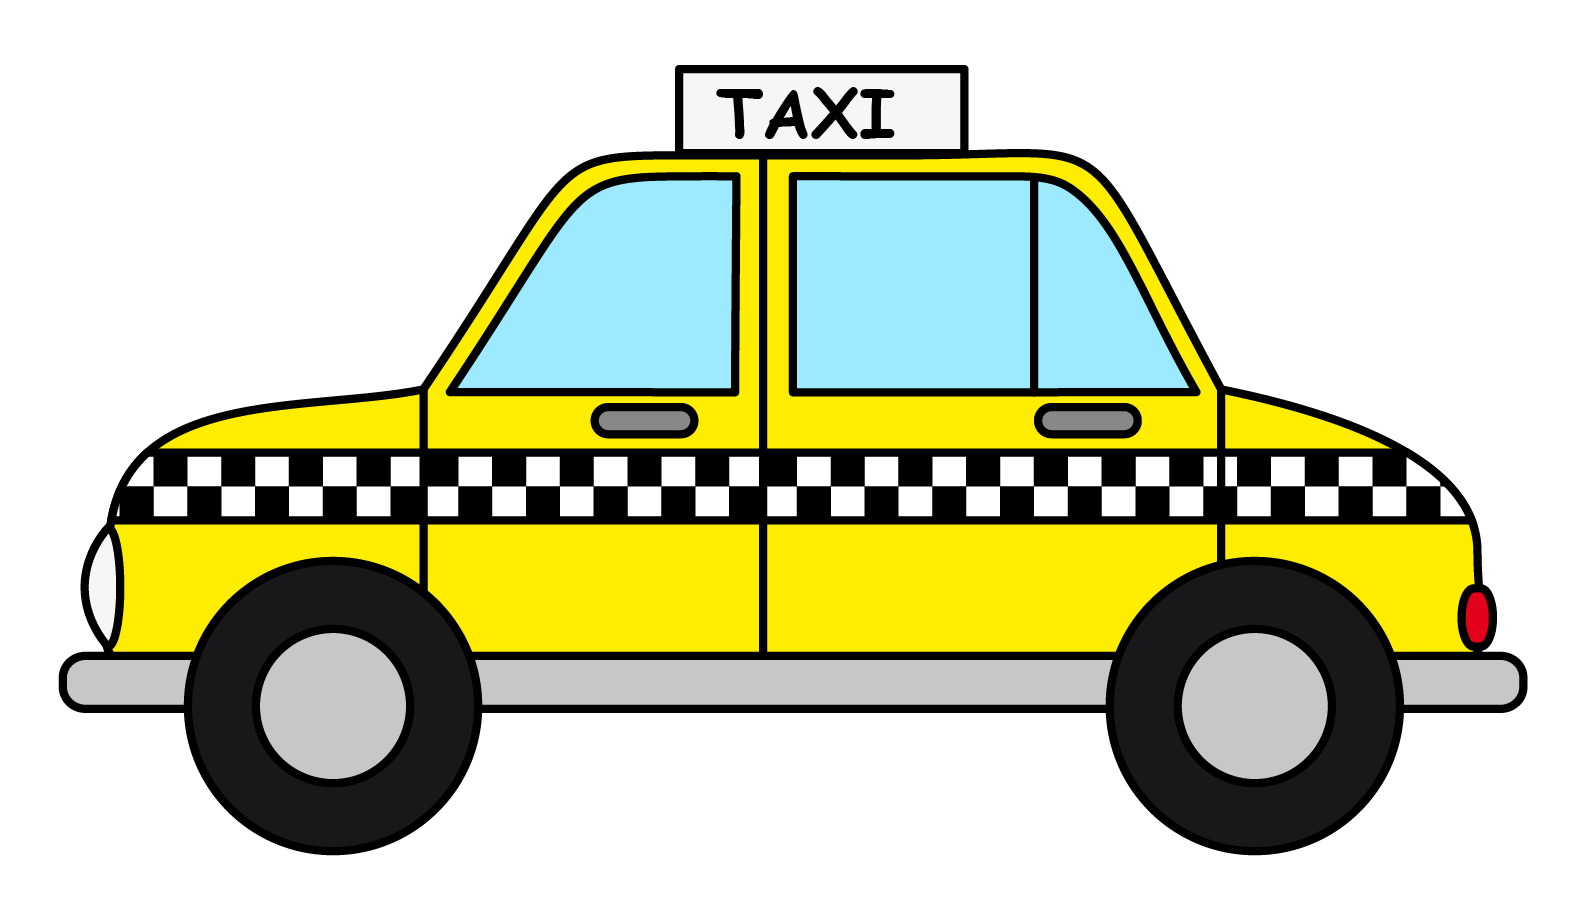 Free to Use & Public Domain Taxi Clip Art